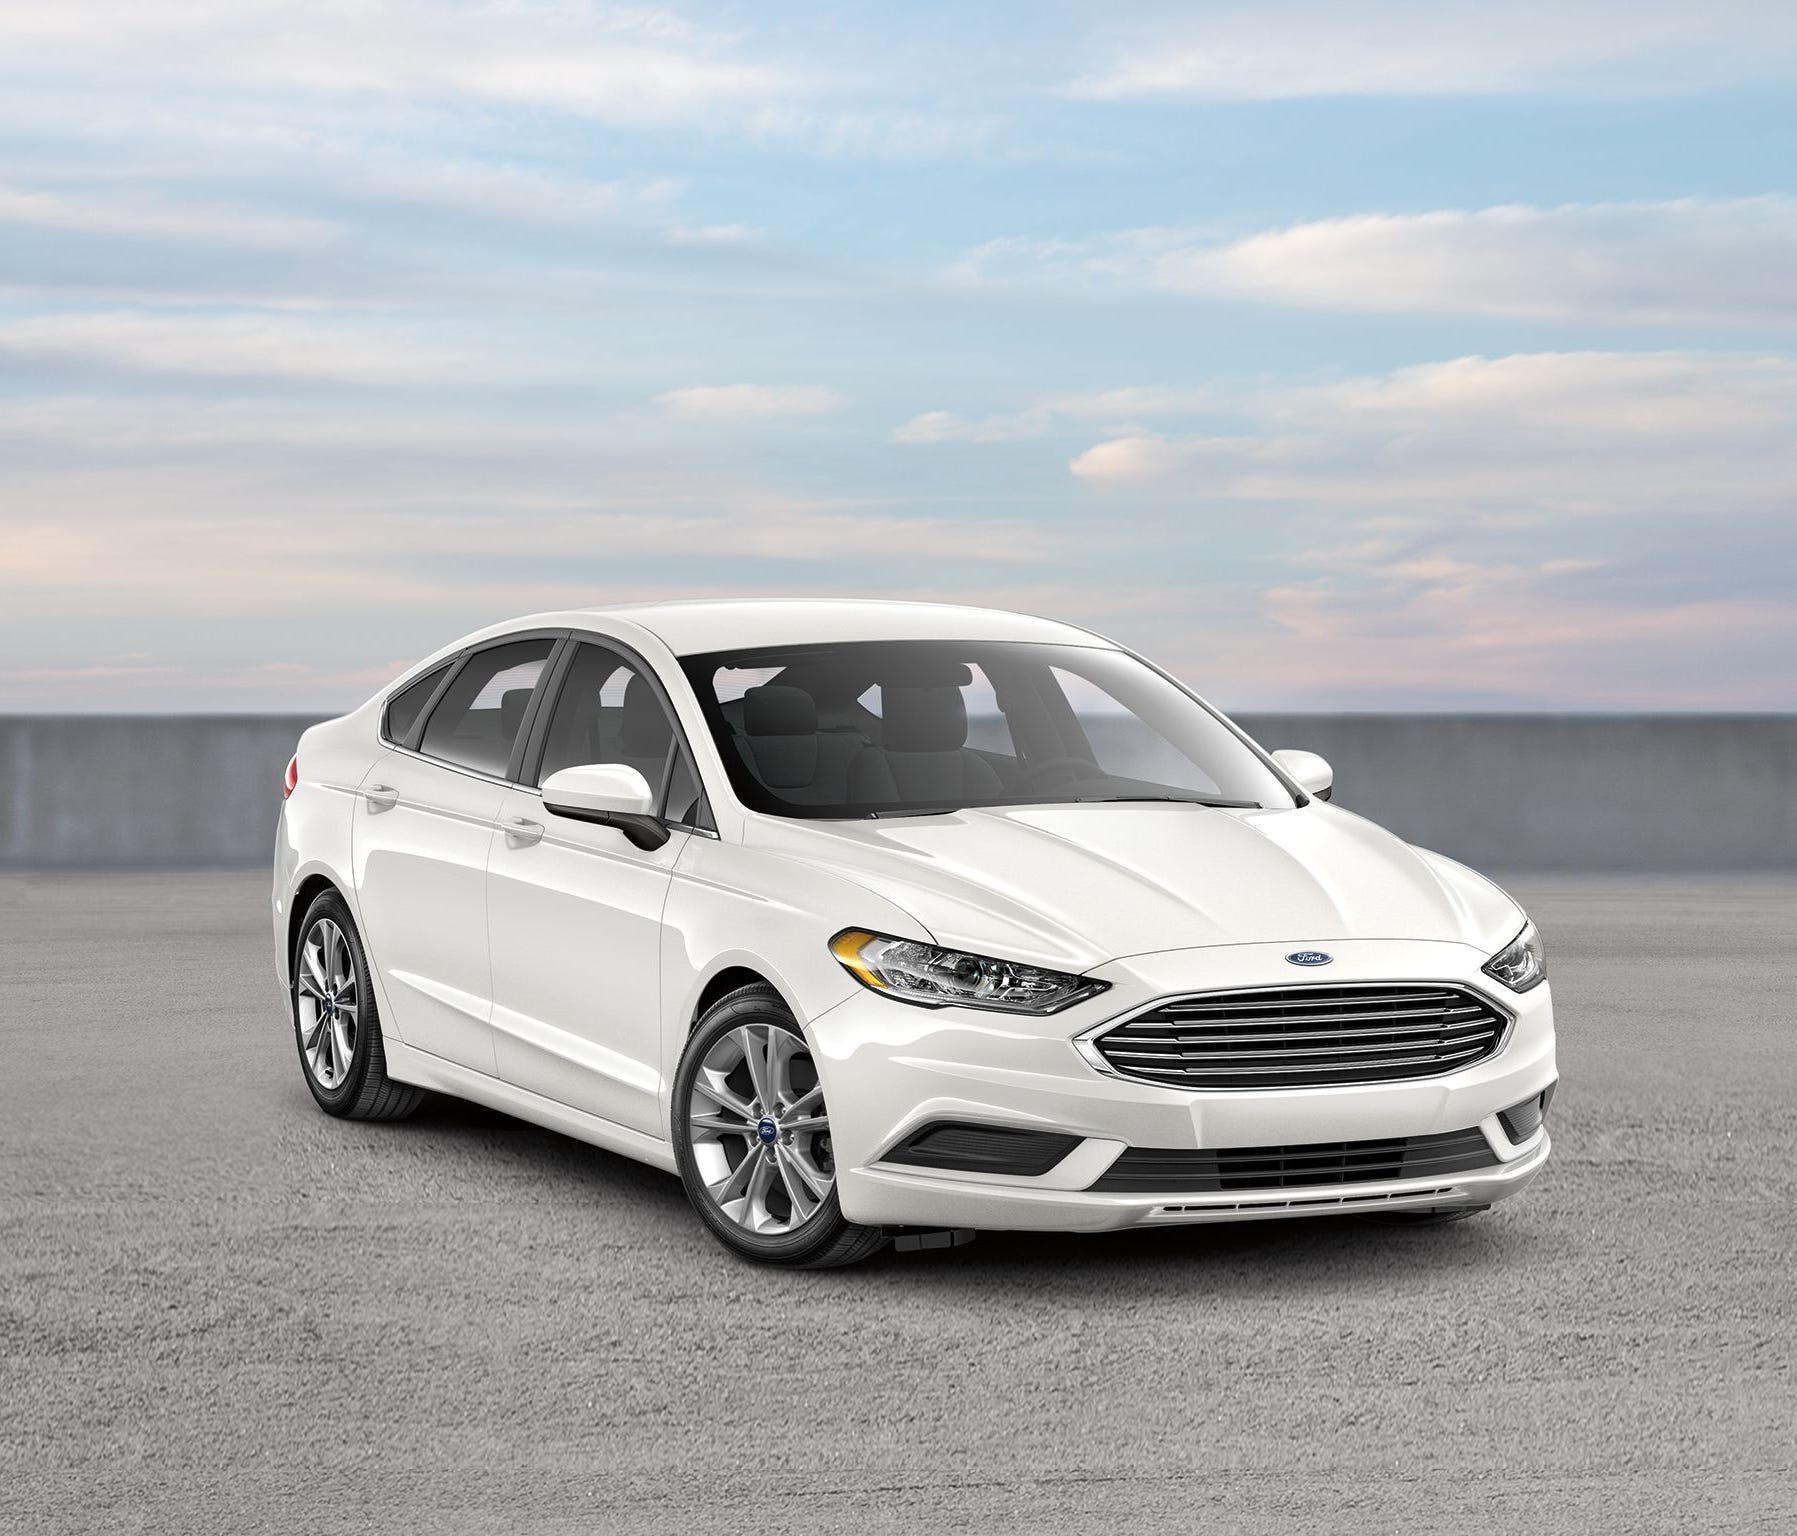 These are some of the most common options if you rent a full-size car at a U.S. airport location: 2018 Ford Fusion.